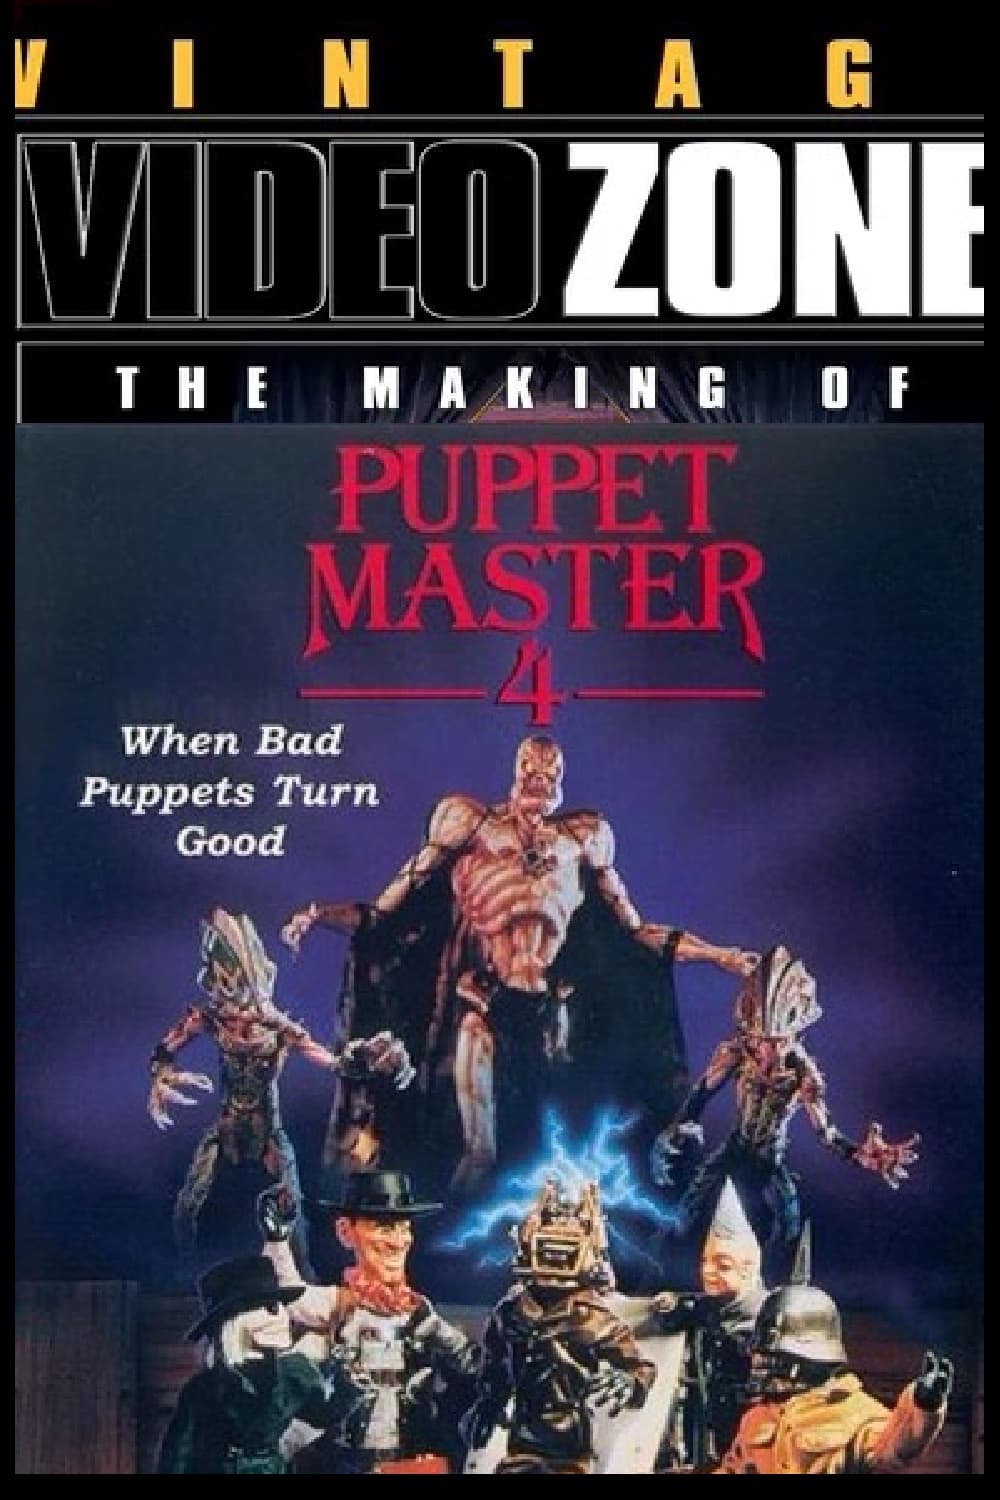 Videozone: The Making of "Puppet Master 4"